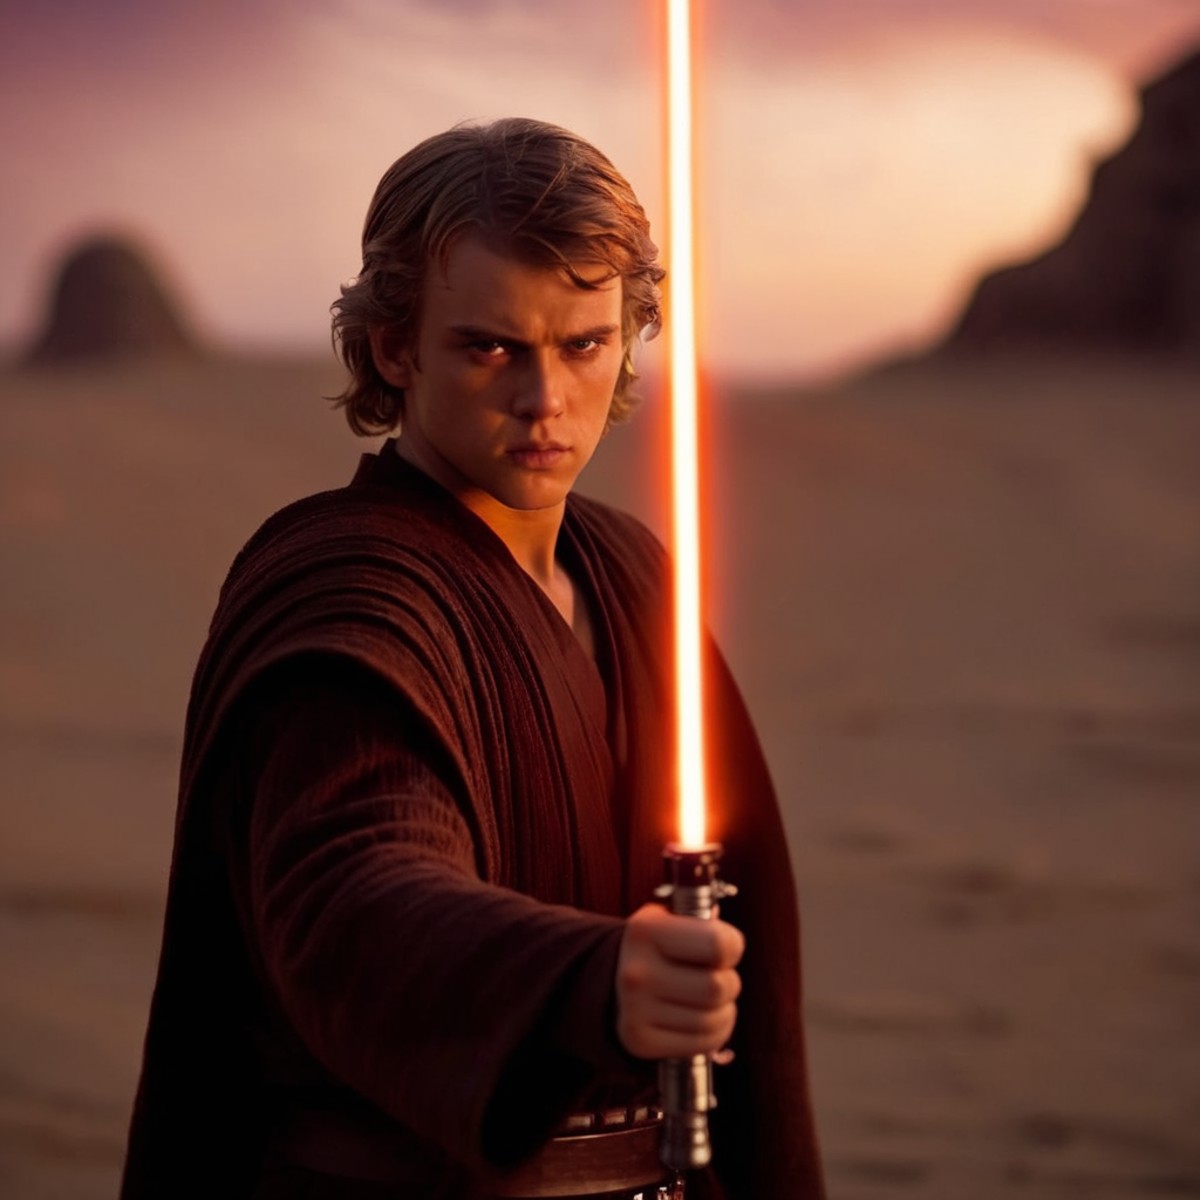 cinematic film still of  <lora:Anakin Skywalker:1.2>
Anakin Skywalker a young man holding a light saber in his hand with f...